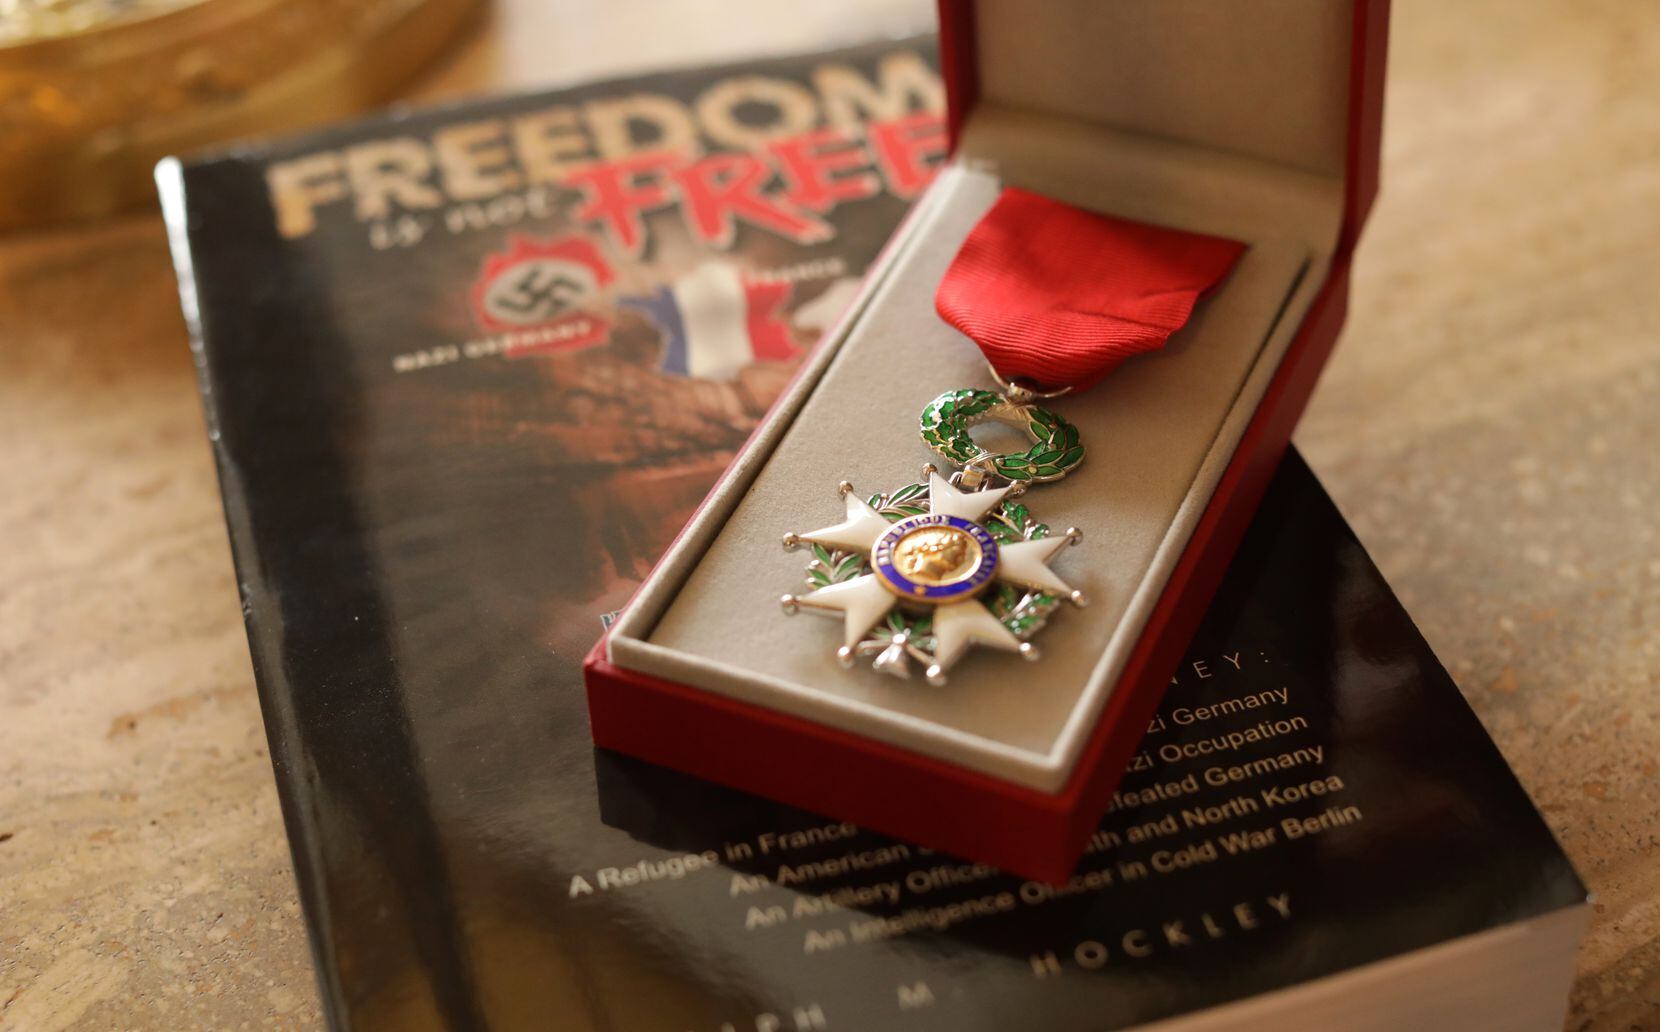 Ralph Hockley’s Legion of Honor medal, France’s highest civilian award, sits atop "Freedom...